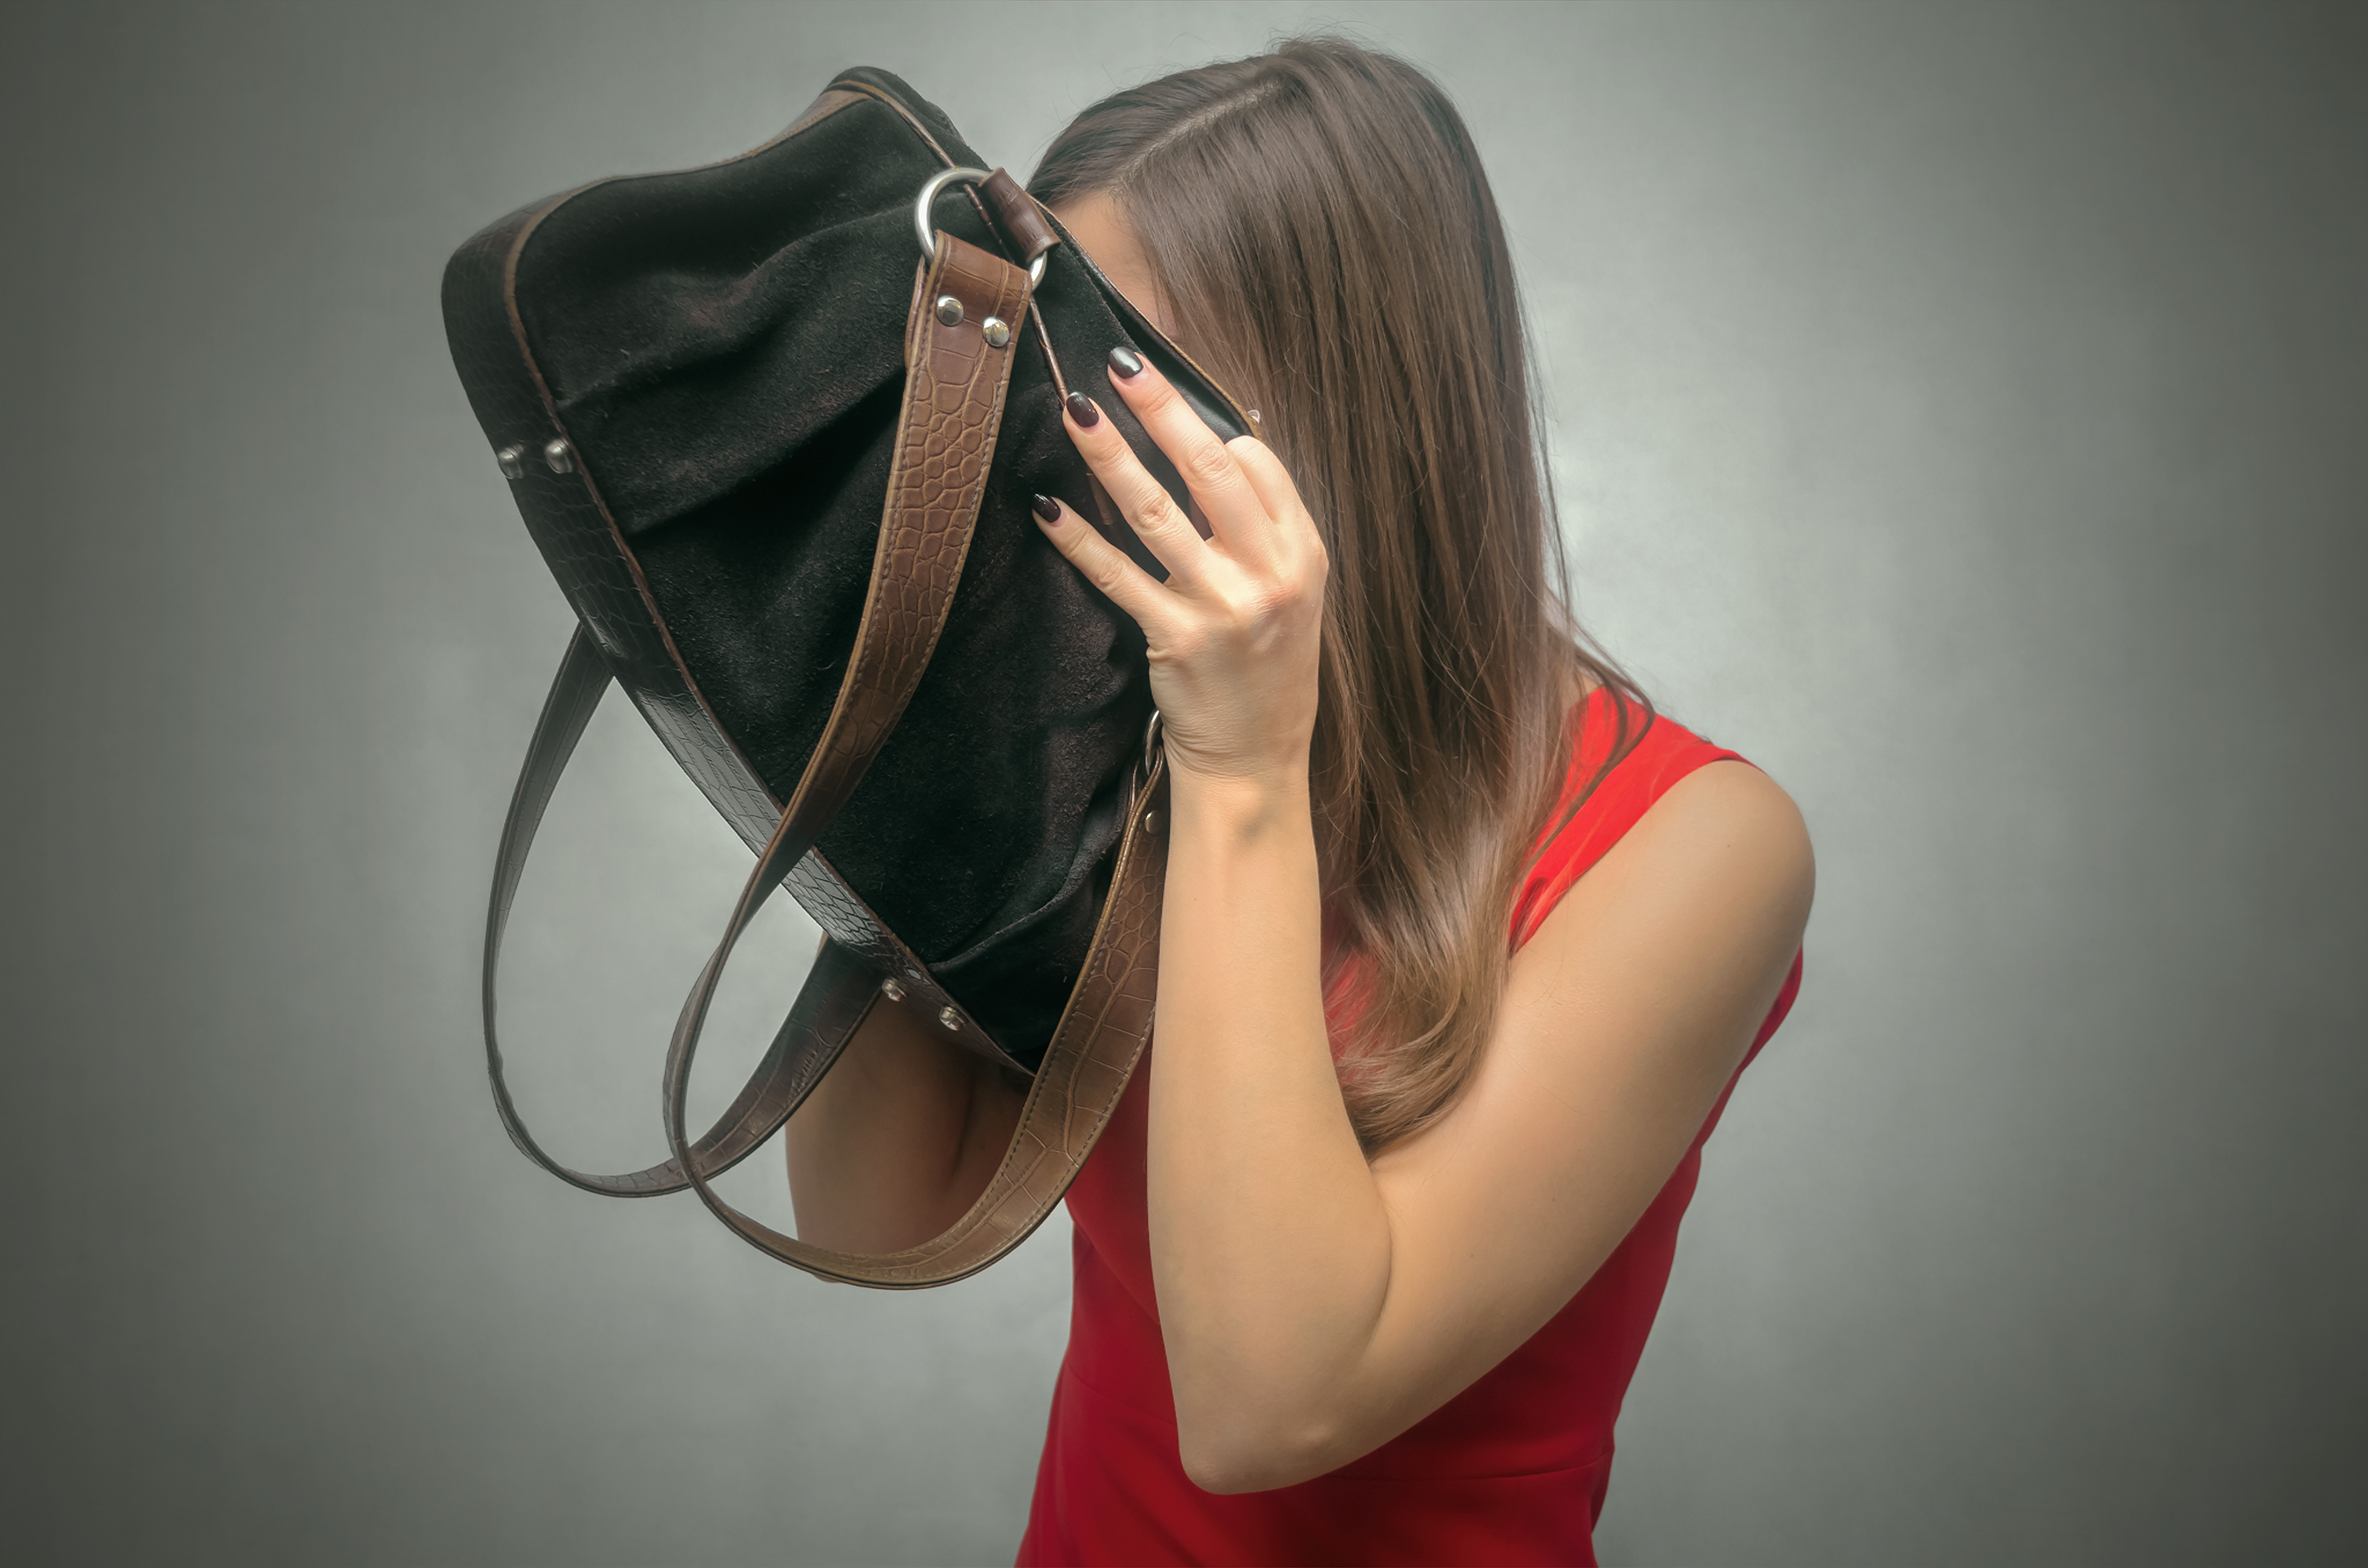 woman sticking her head in a bag